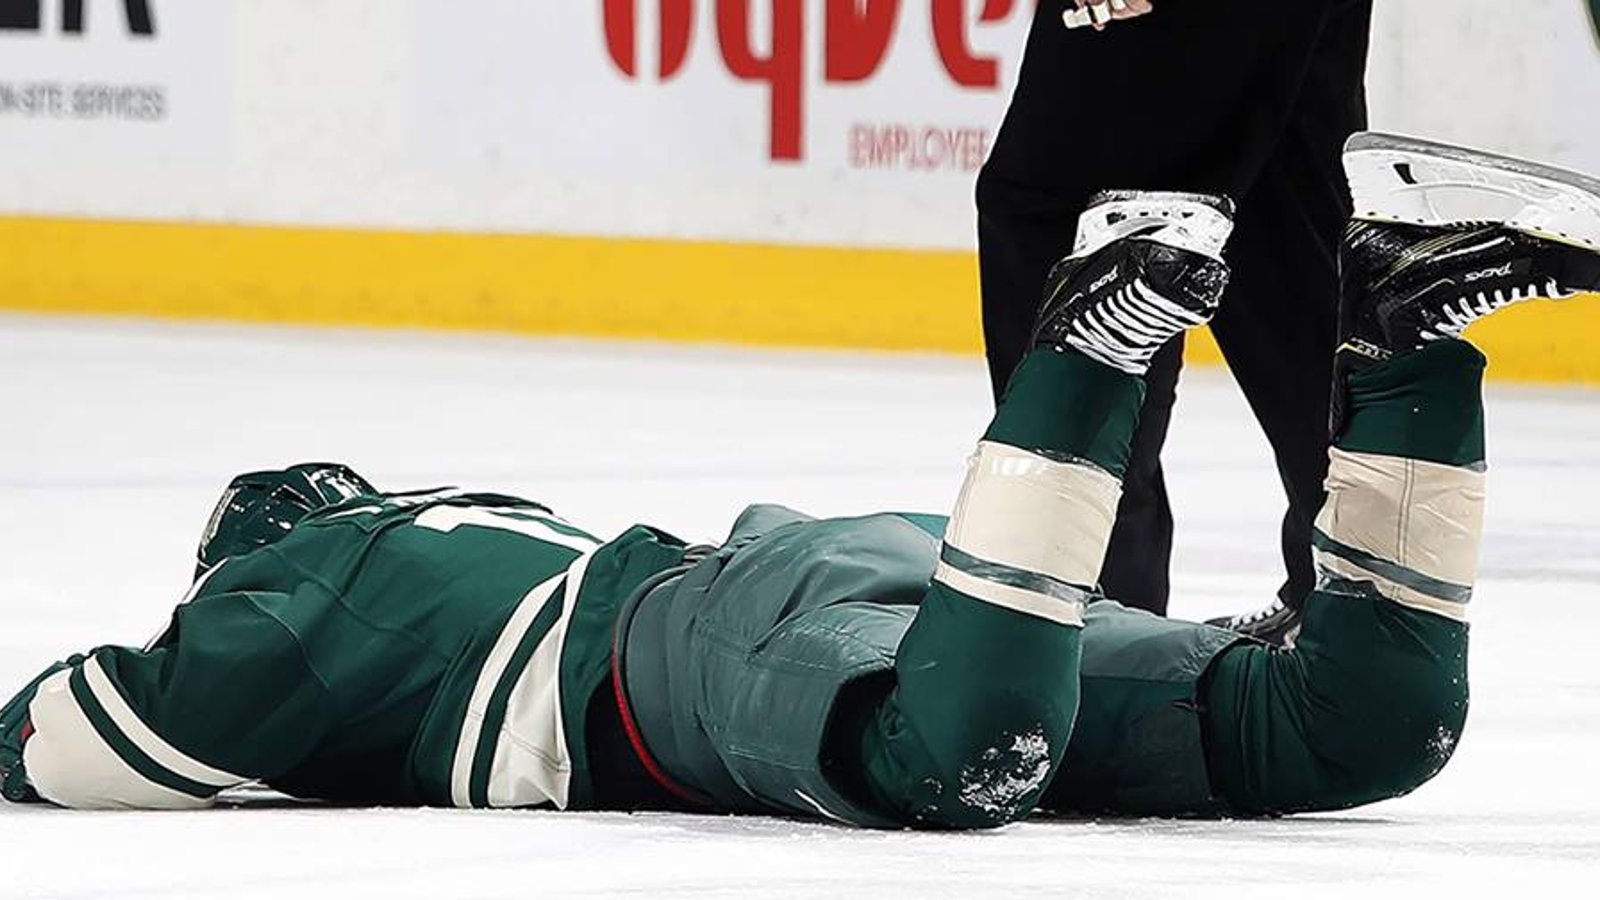 Injury report: Star forward likely out for season opener